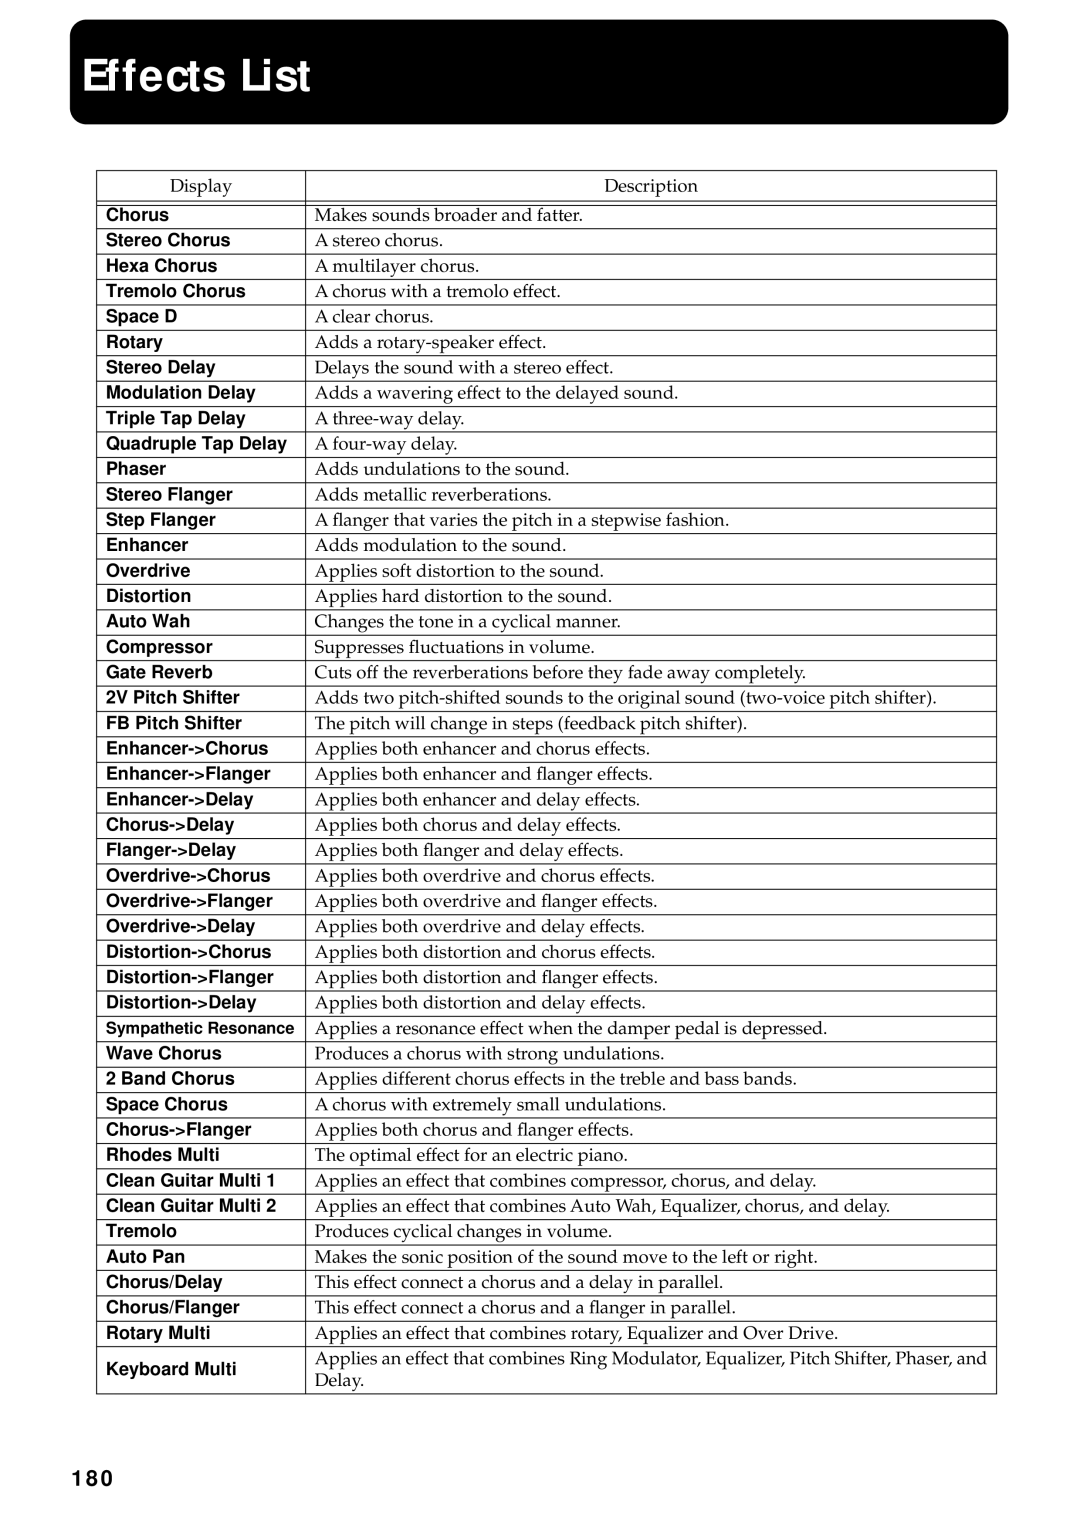 Roland KF-90 owner manual Effects List, 180 